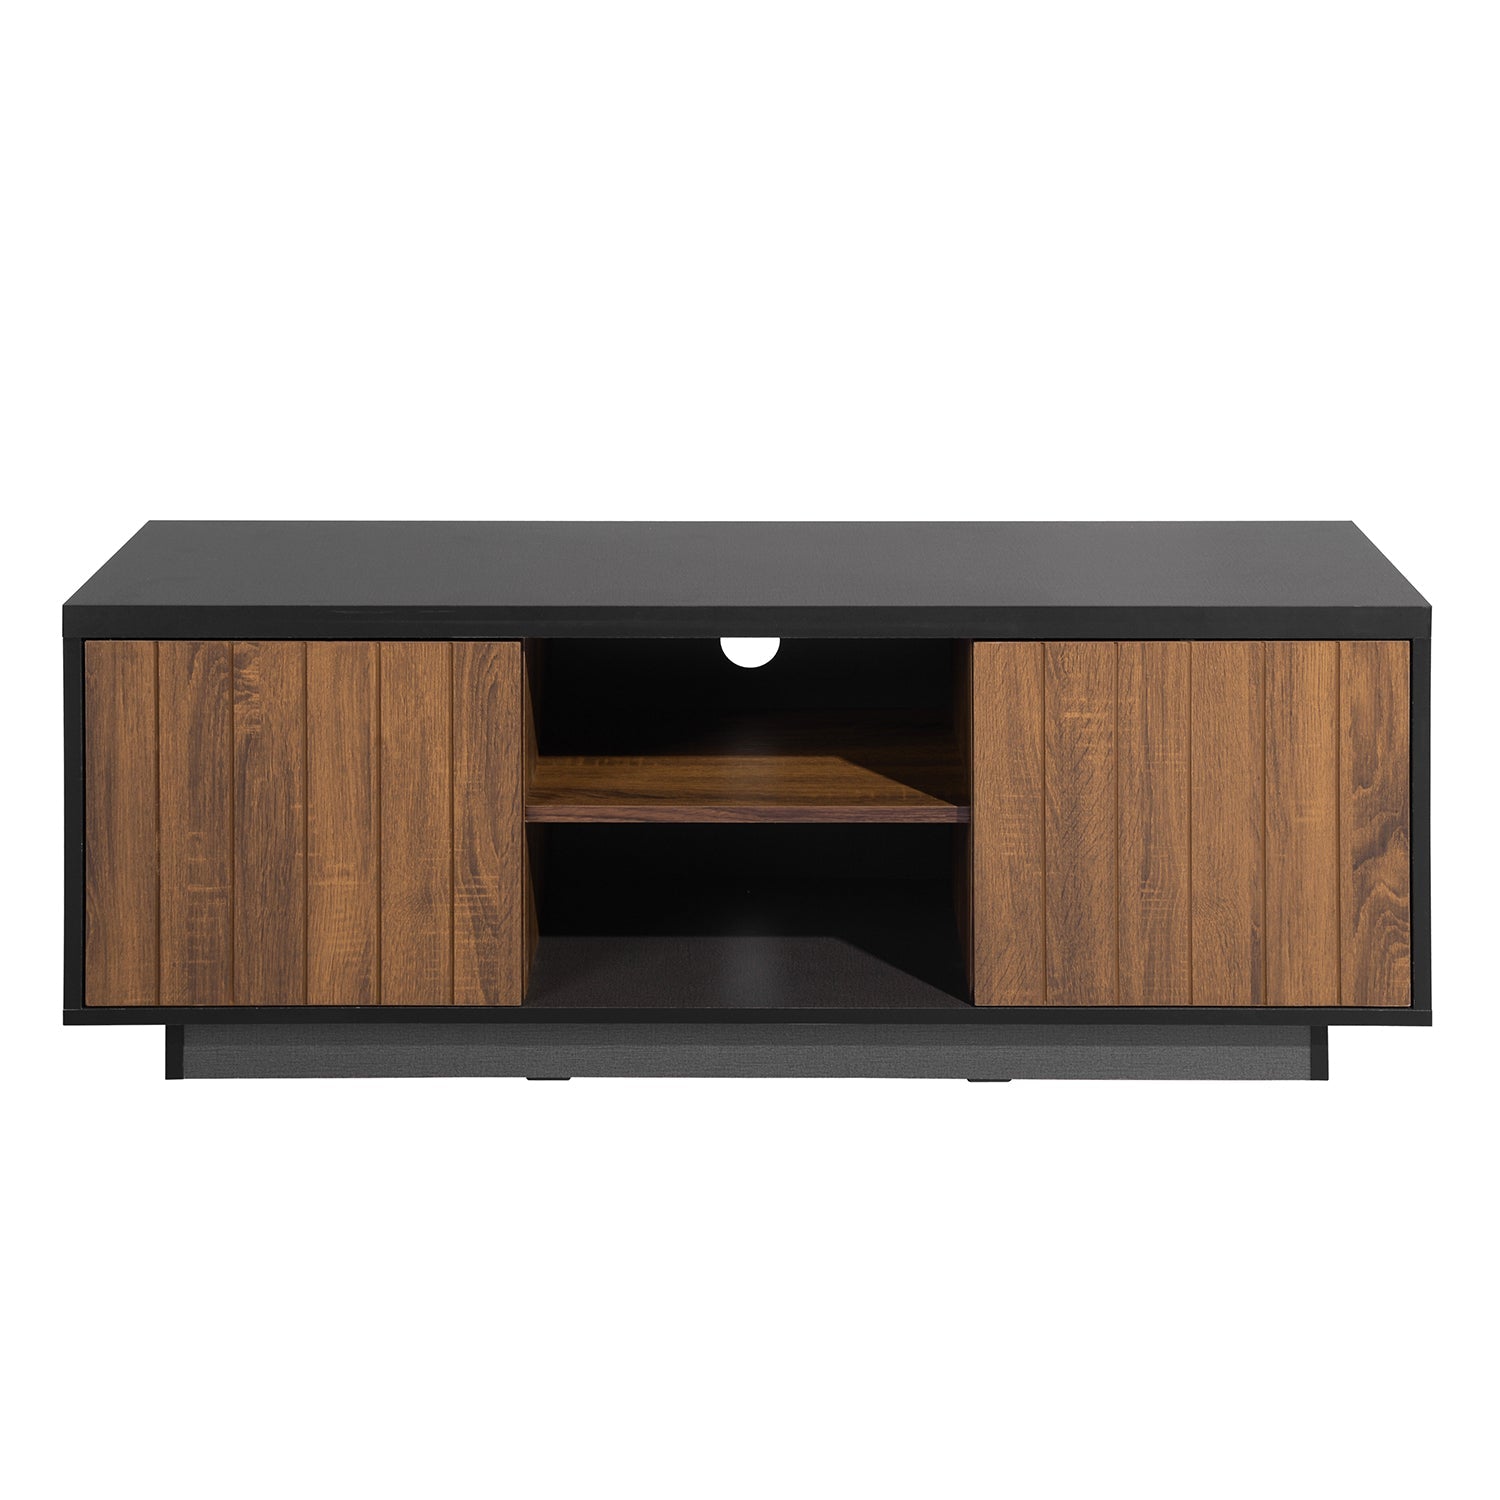 Merino Tv Stand Tv Stands & Entertainment Centers